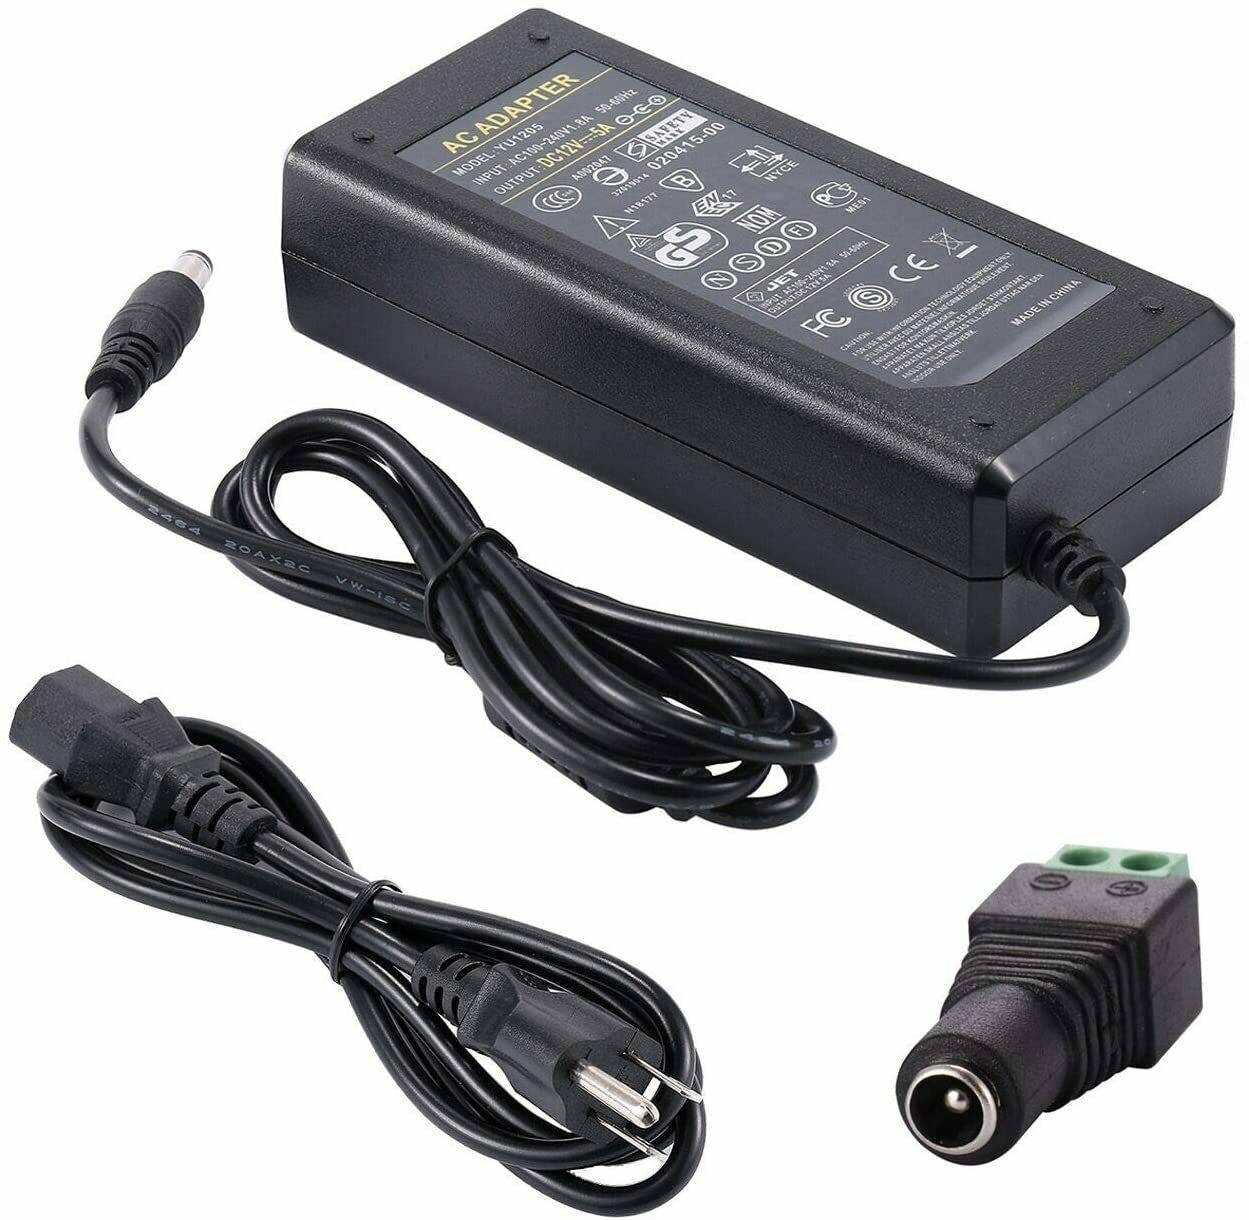 *Brand NEW* AC DC 12V 5A Power Supply Adapter Transformer Charger for LED Strip CCTV DVR - Click Image to Close